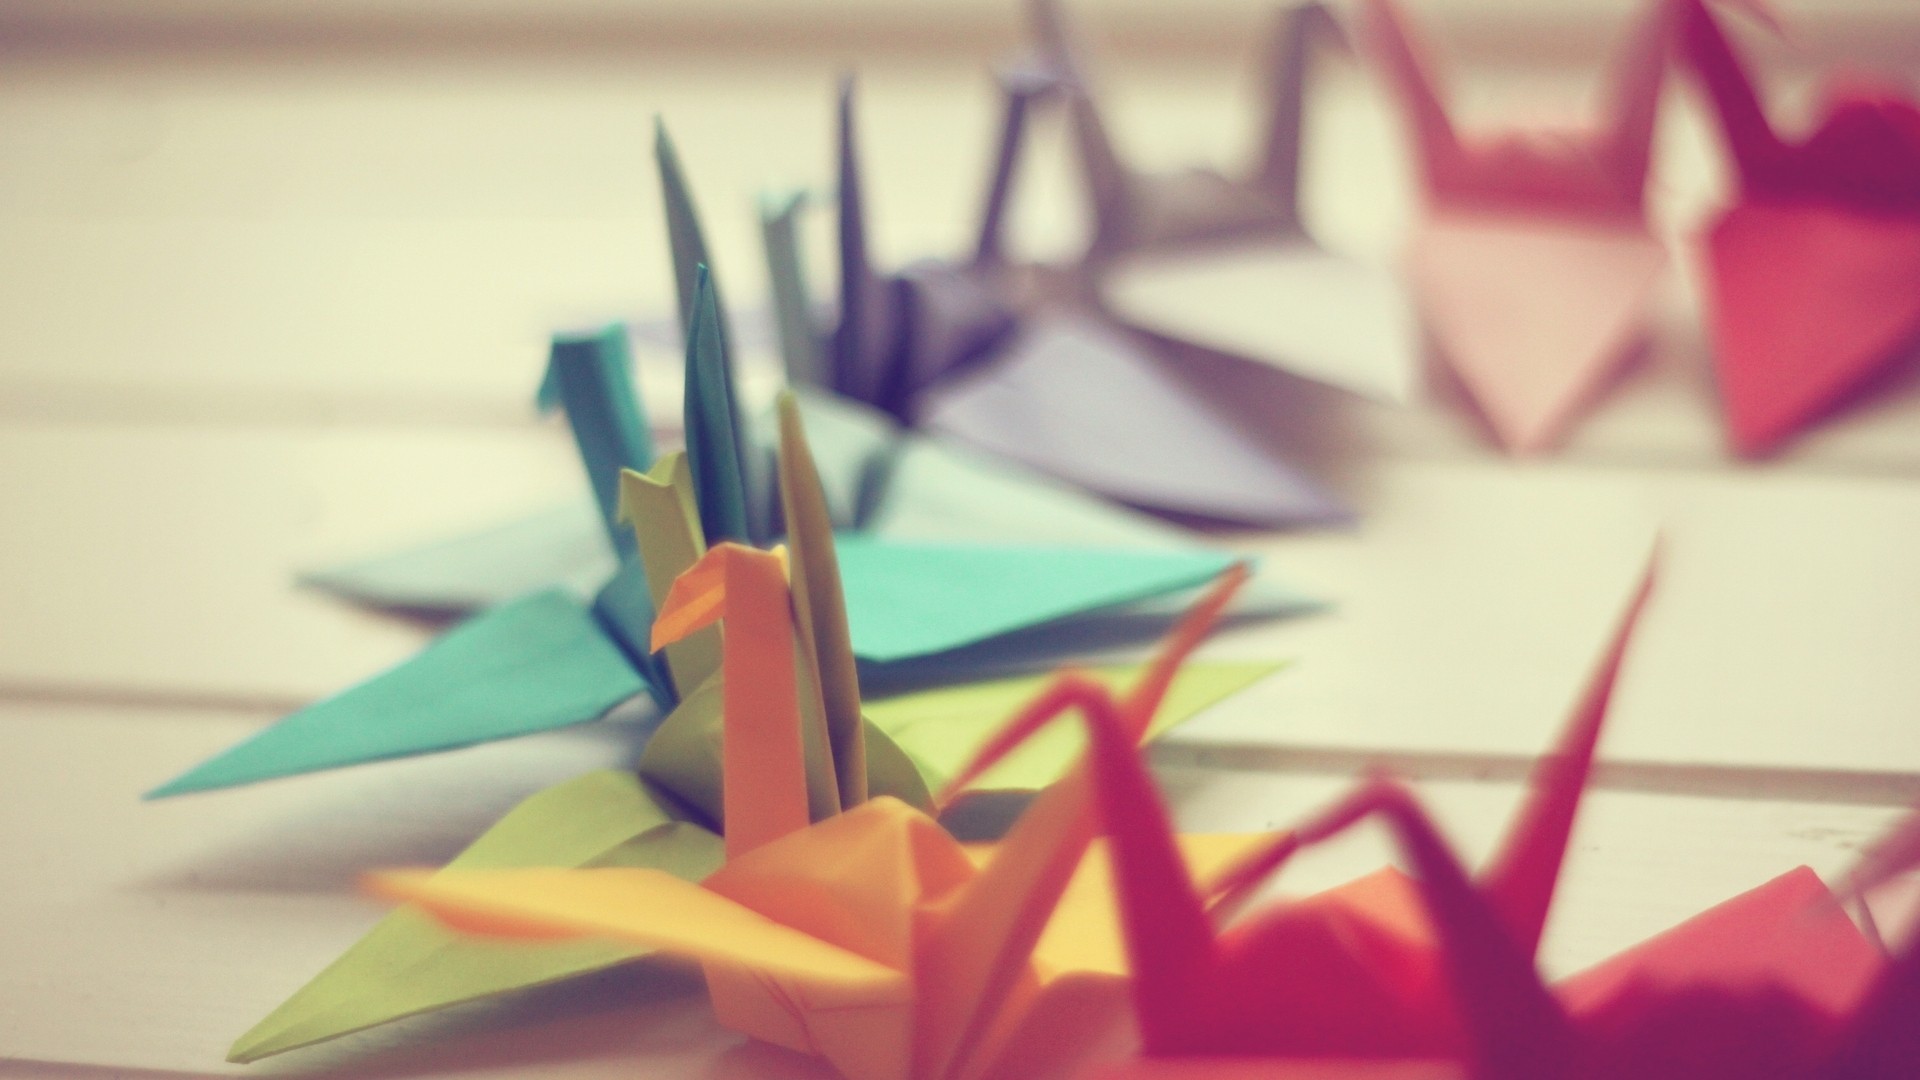 Origami Paper Cranes Photography Origami Colorful 1920x1080